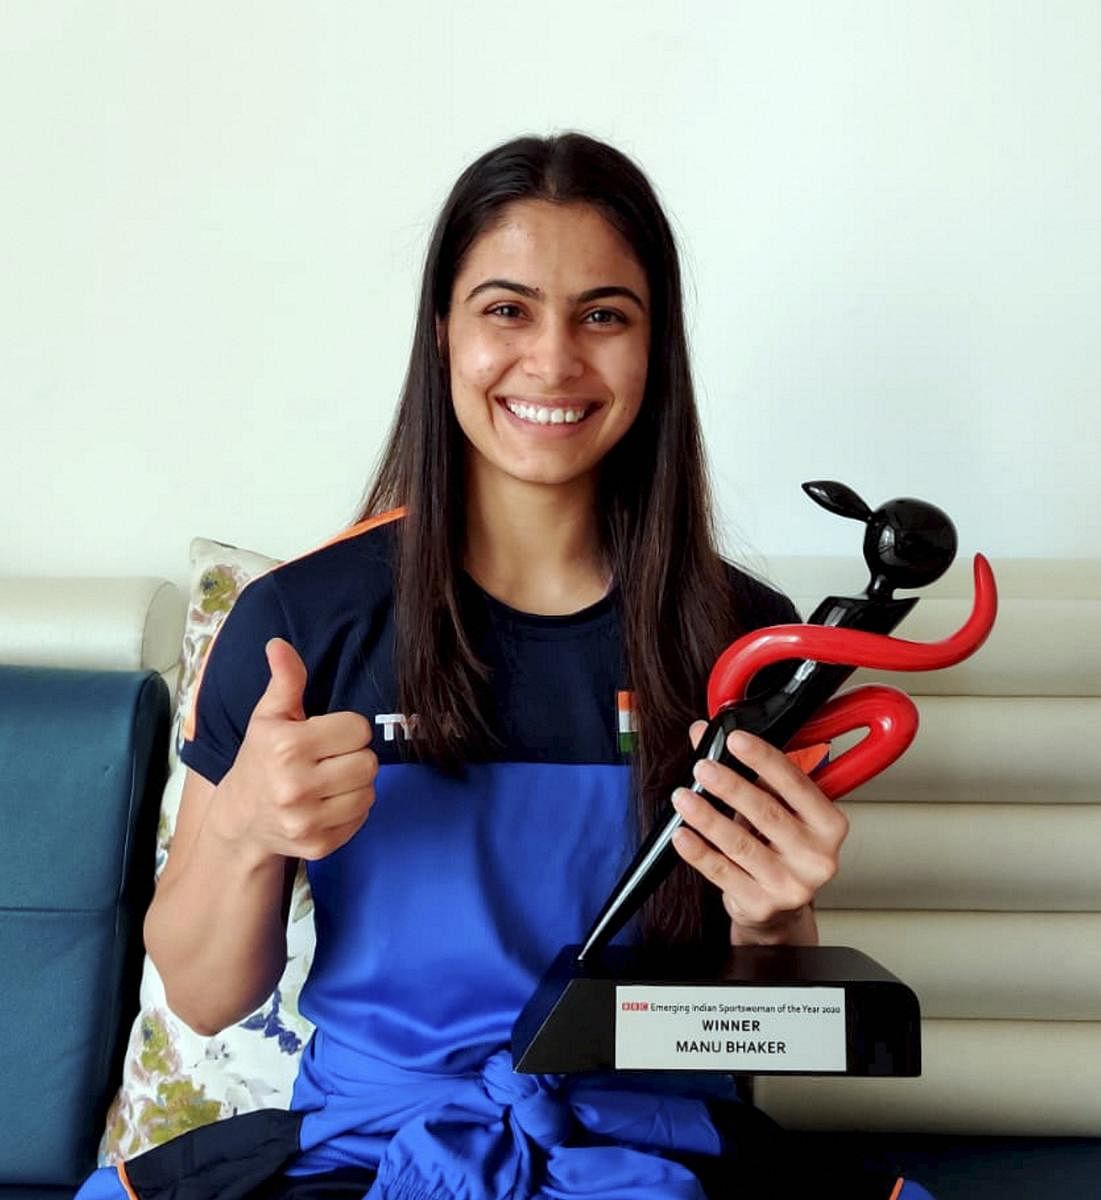 Manu Bhaker poses for photographs with the BBC Indian Emerging Player of the Year award. The 19-year-old was the youngest Indian to clinch the women's 10m air pistol gold at the Shooting World Cup in 2018. Credit: PTI